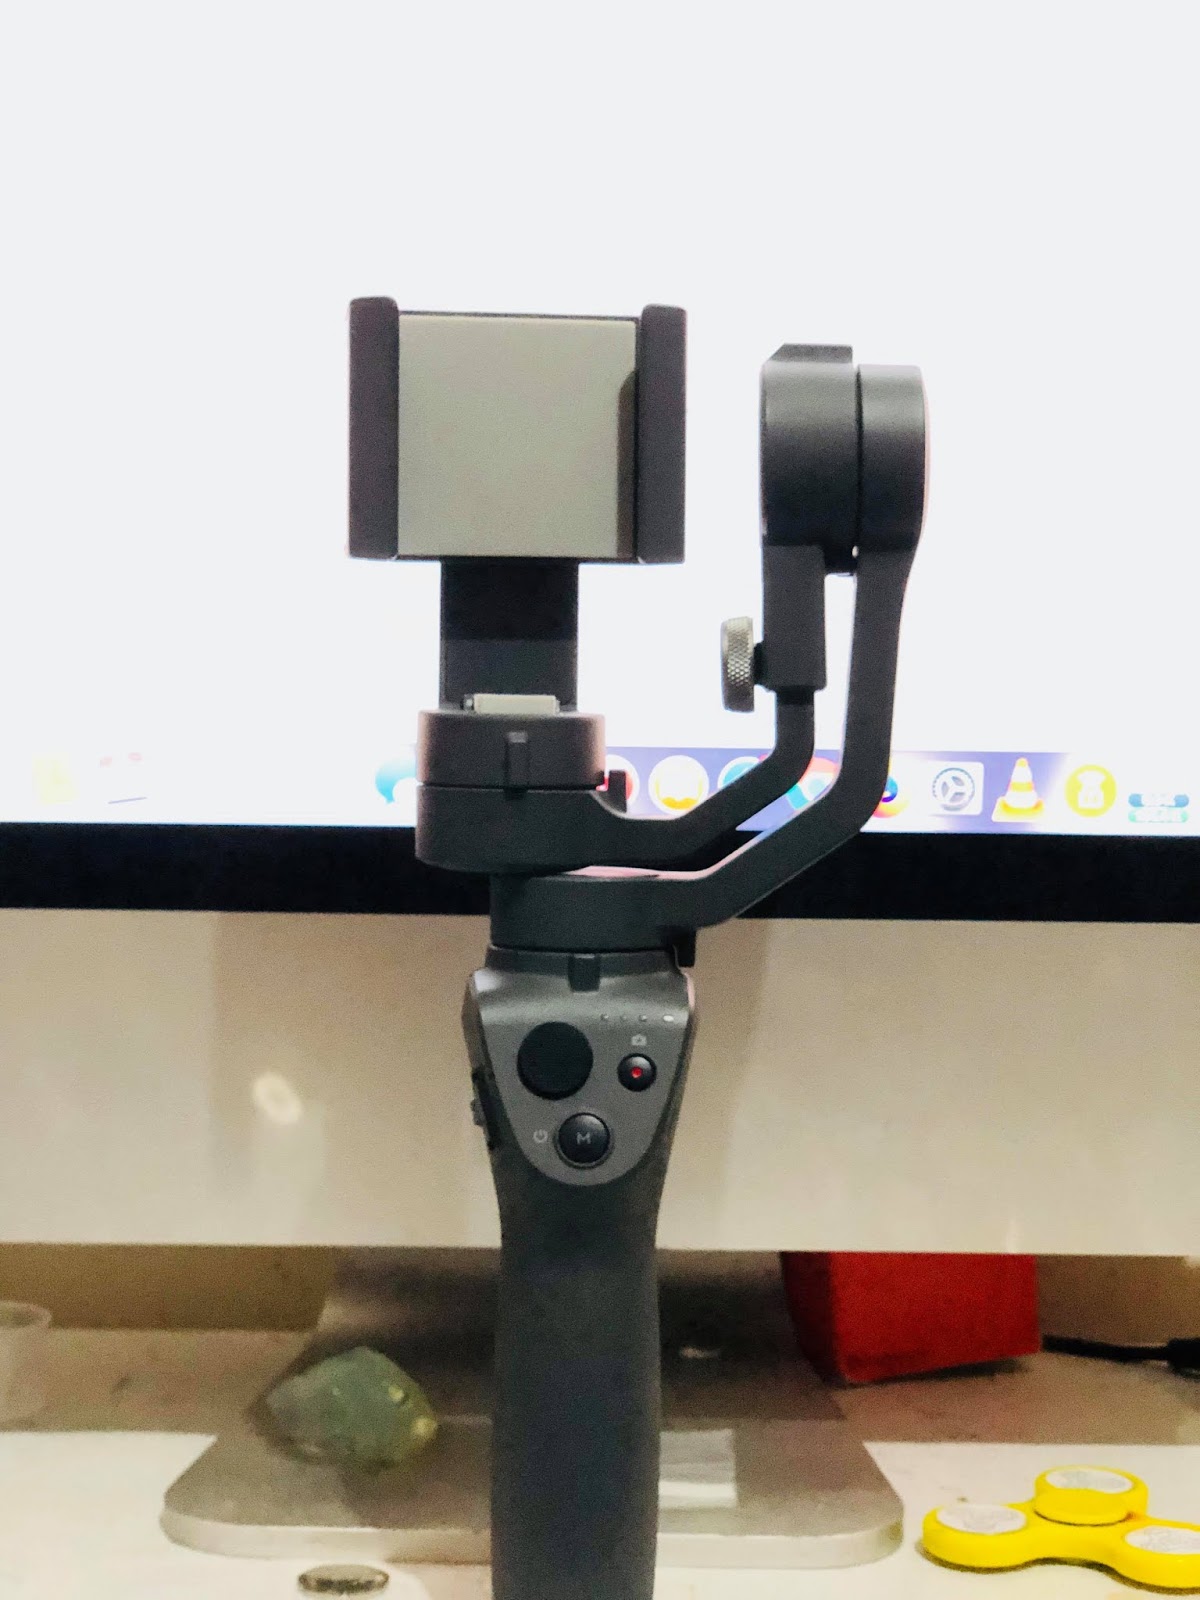 DJI Osmo Mobile 2 - Unboxing Review - Ceddy's Random